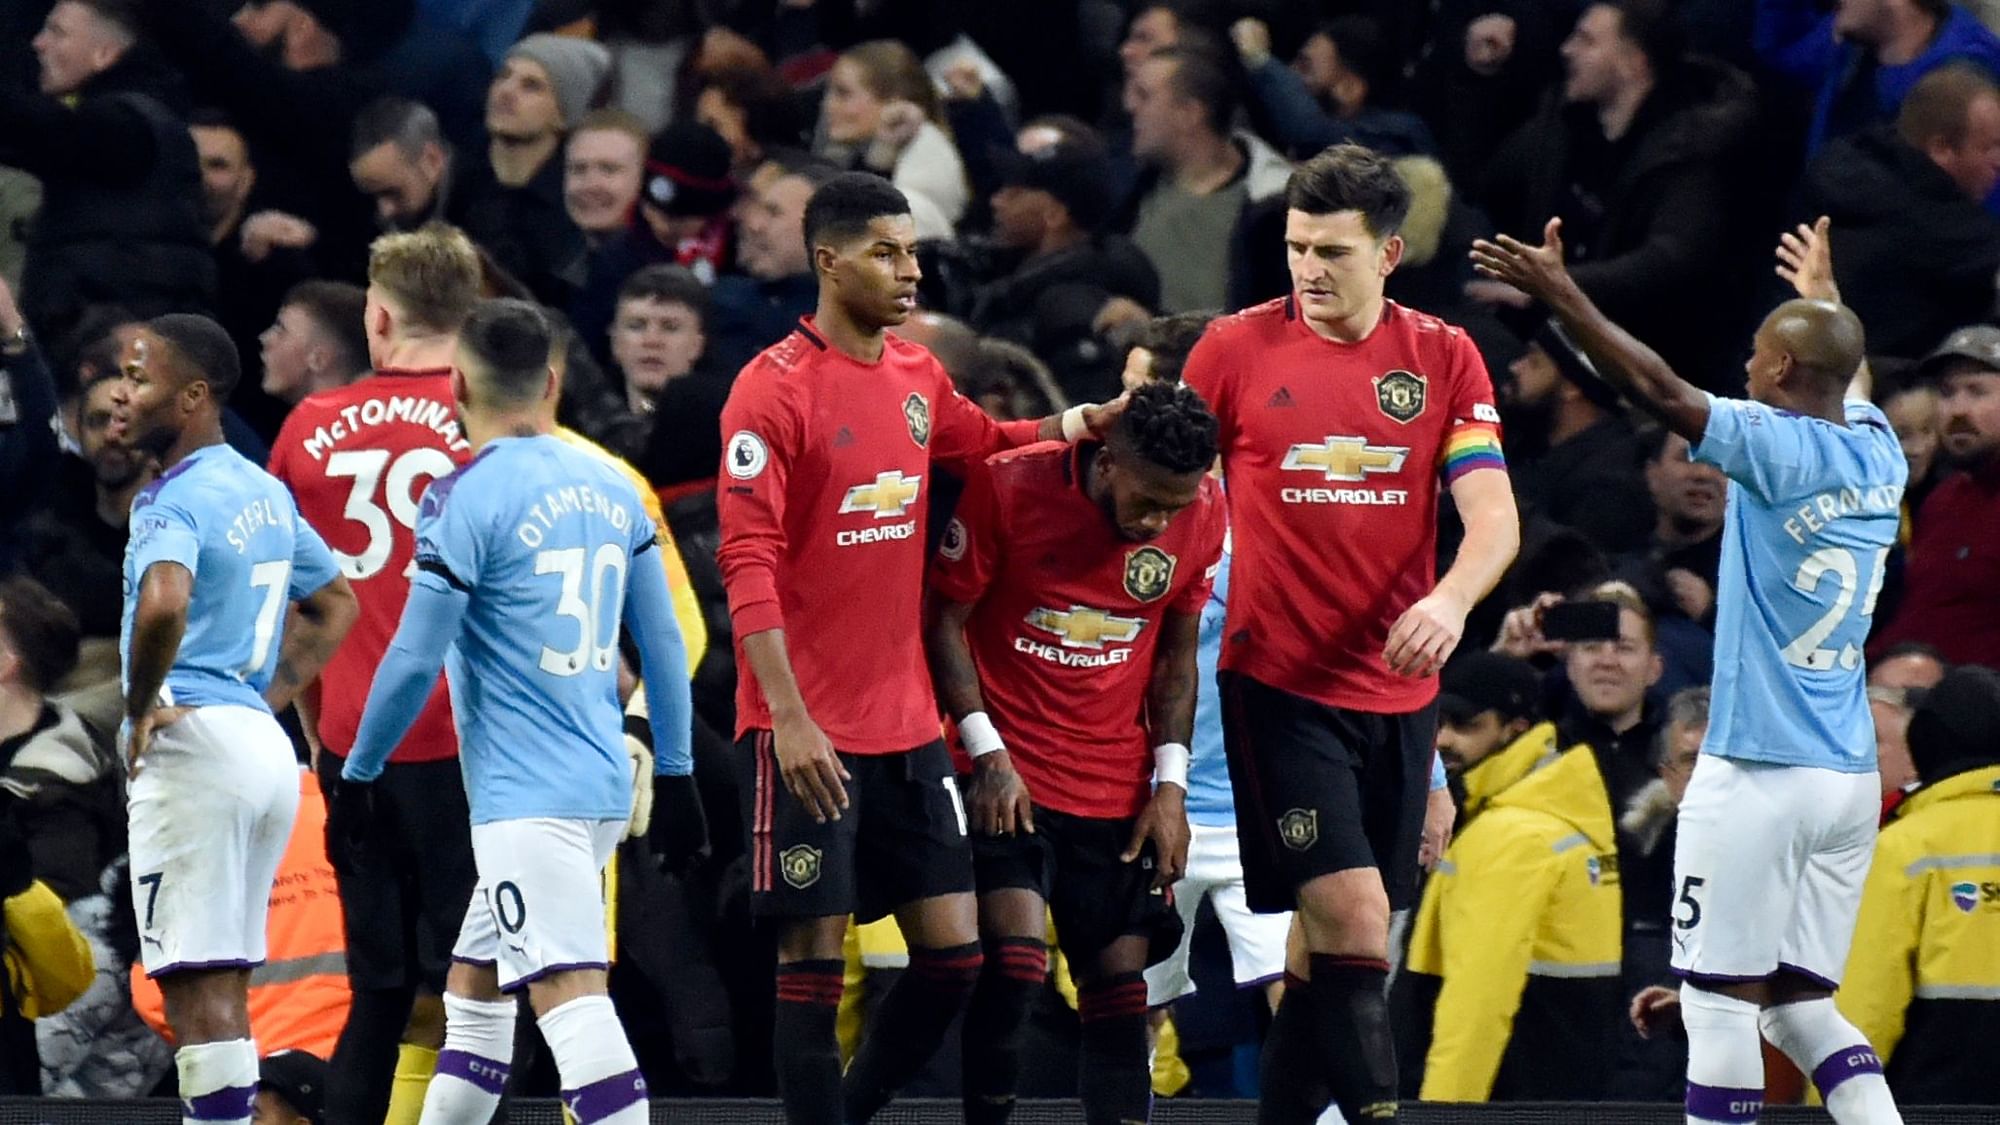 Manchester United’s Fred, center, reacts to items thrown at him by Manchester City fans during the English Premier League soccer match between Manchester City and Manchester United.